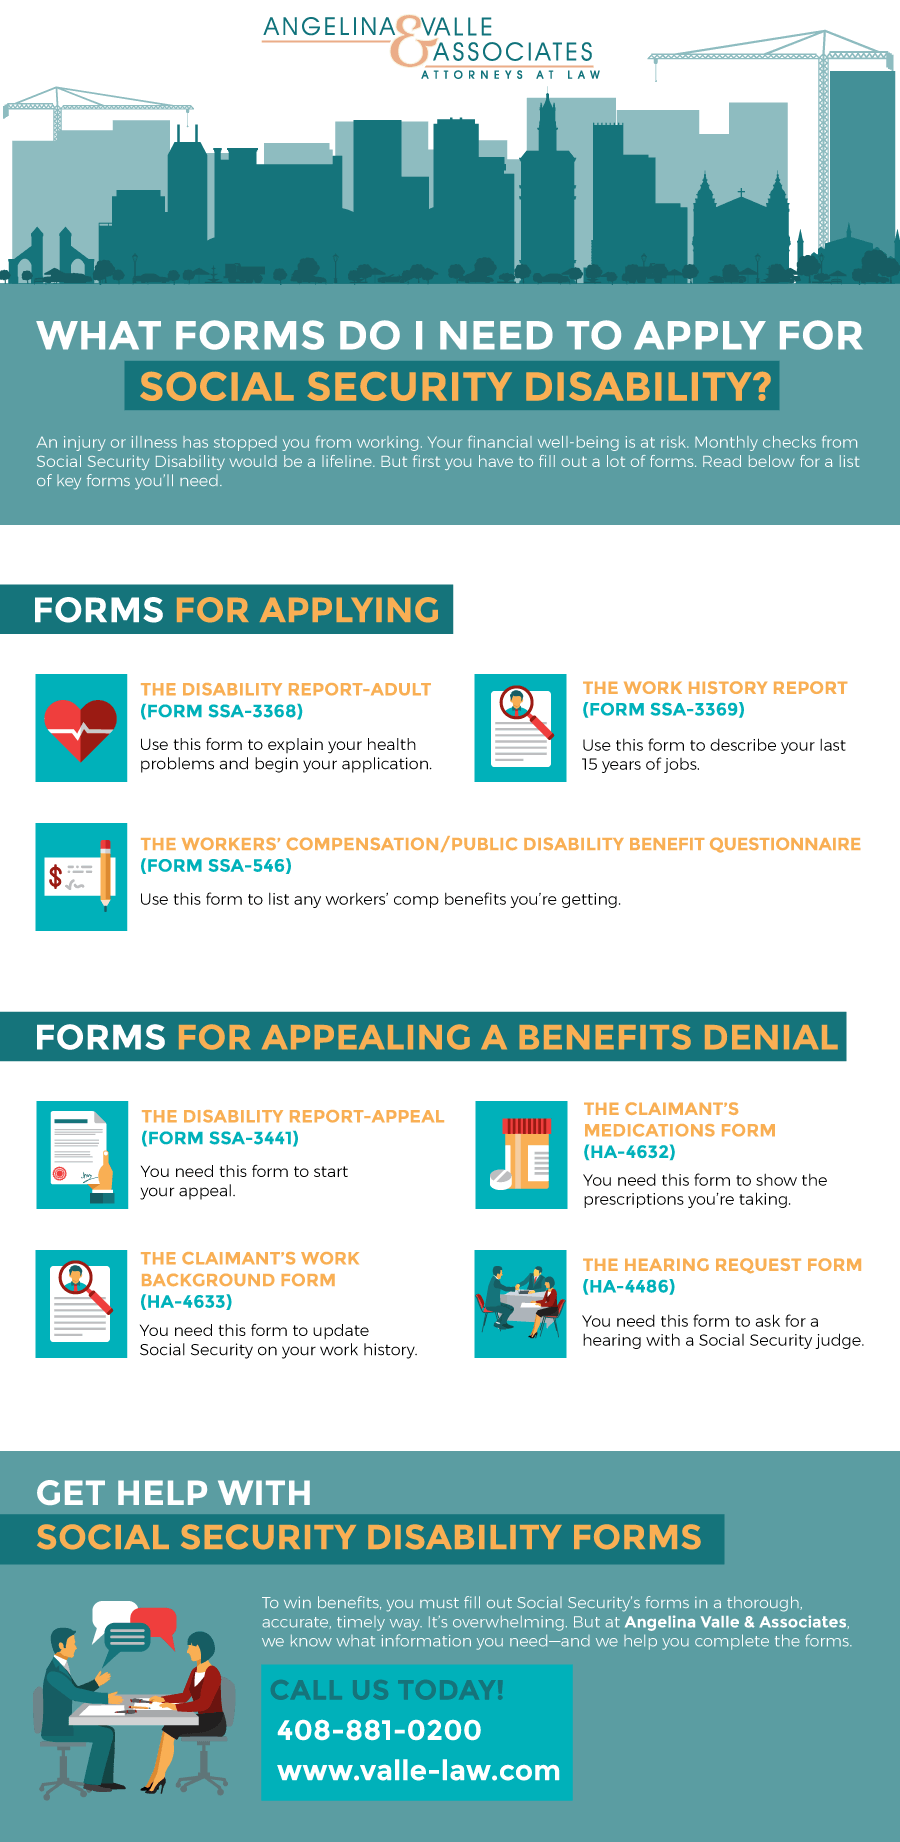 An infographic answering the question: "What forms do I need to apply for social security disability?"